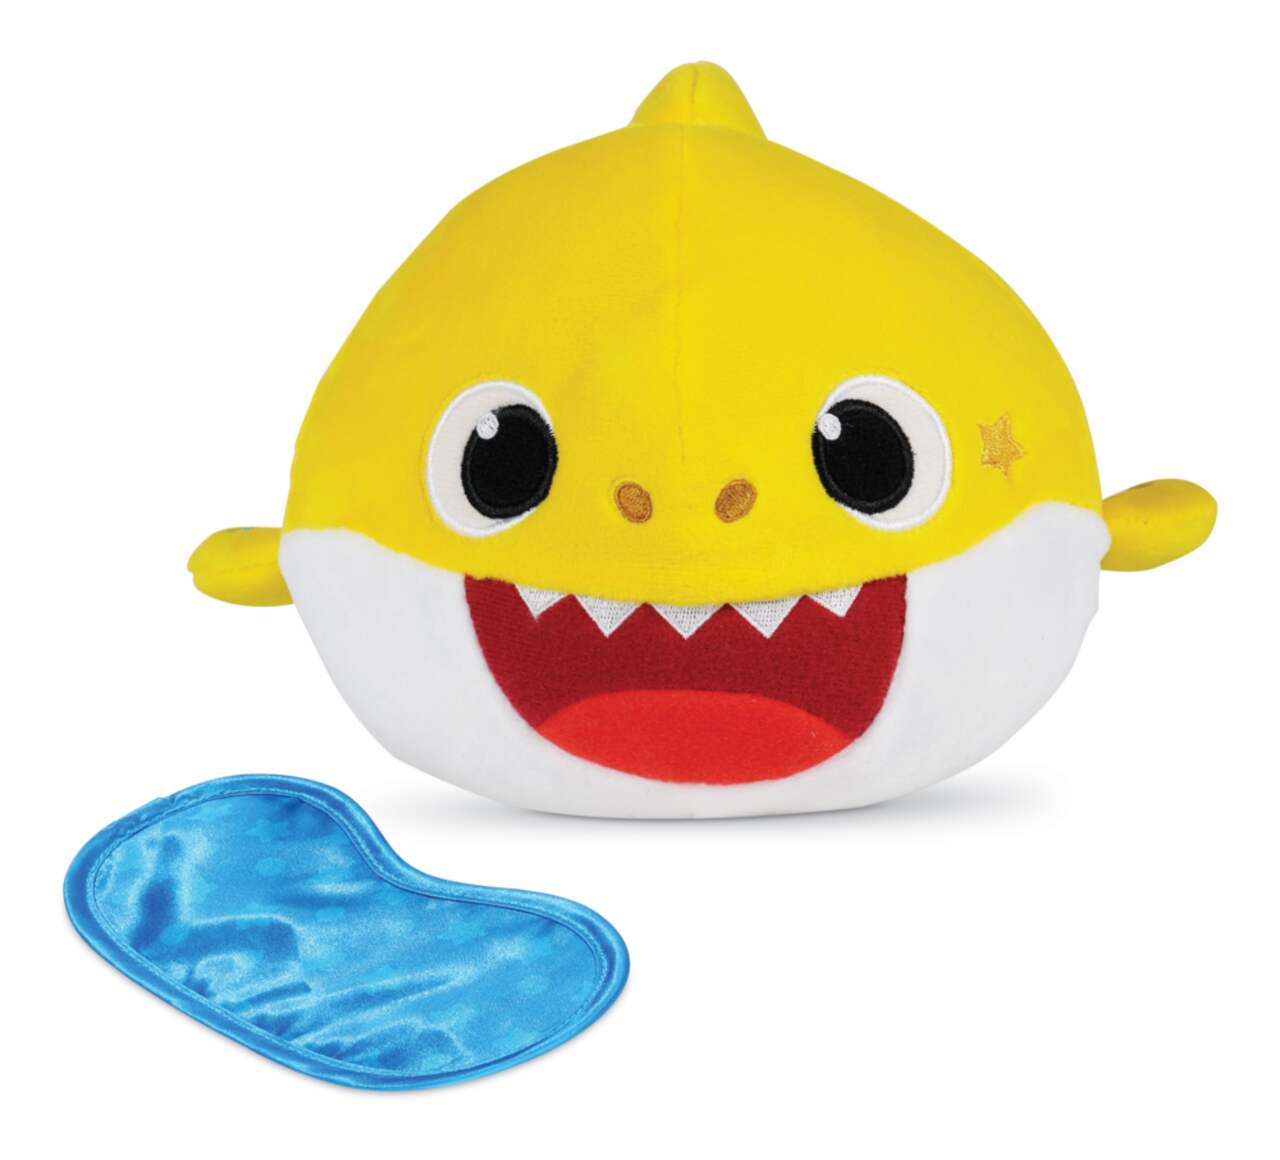 Wowee Baby Shark Single & Snuggle Plush Musical Toy For Kids, Assorted,  Ages 3+